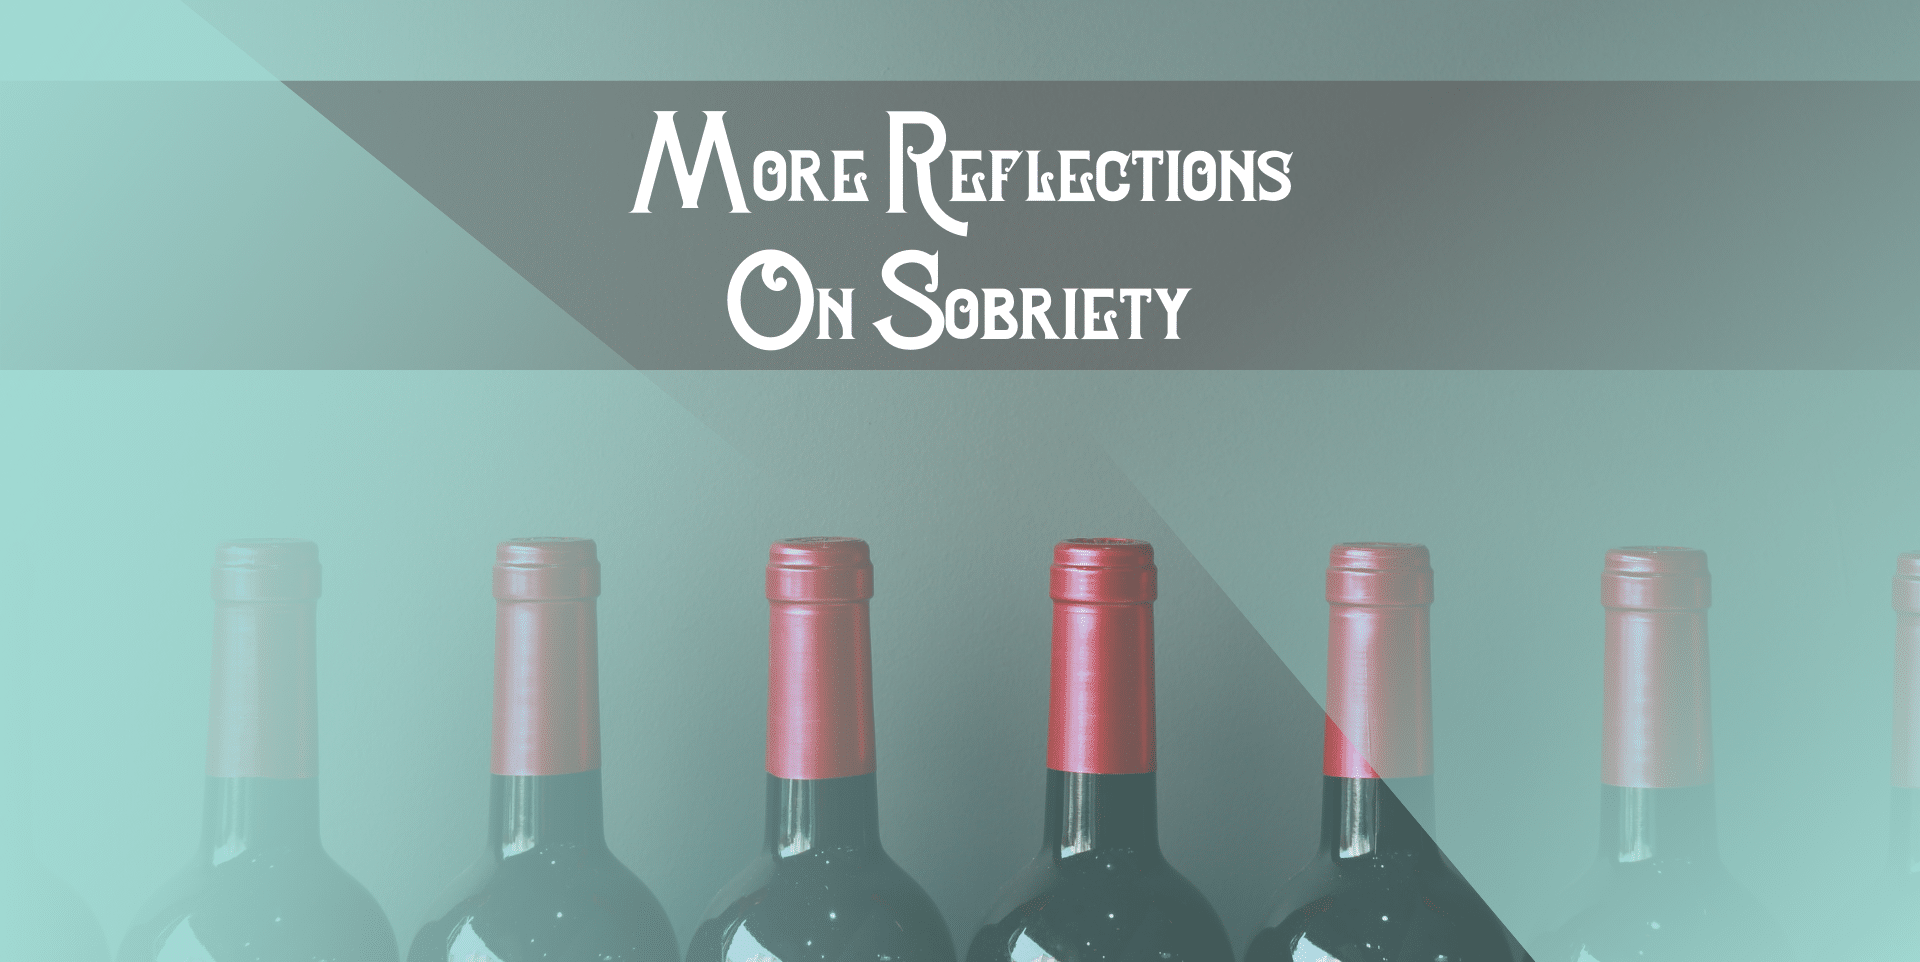 More Reflections on Sobriety